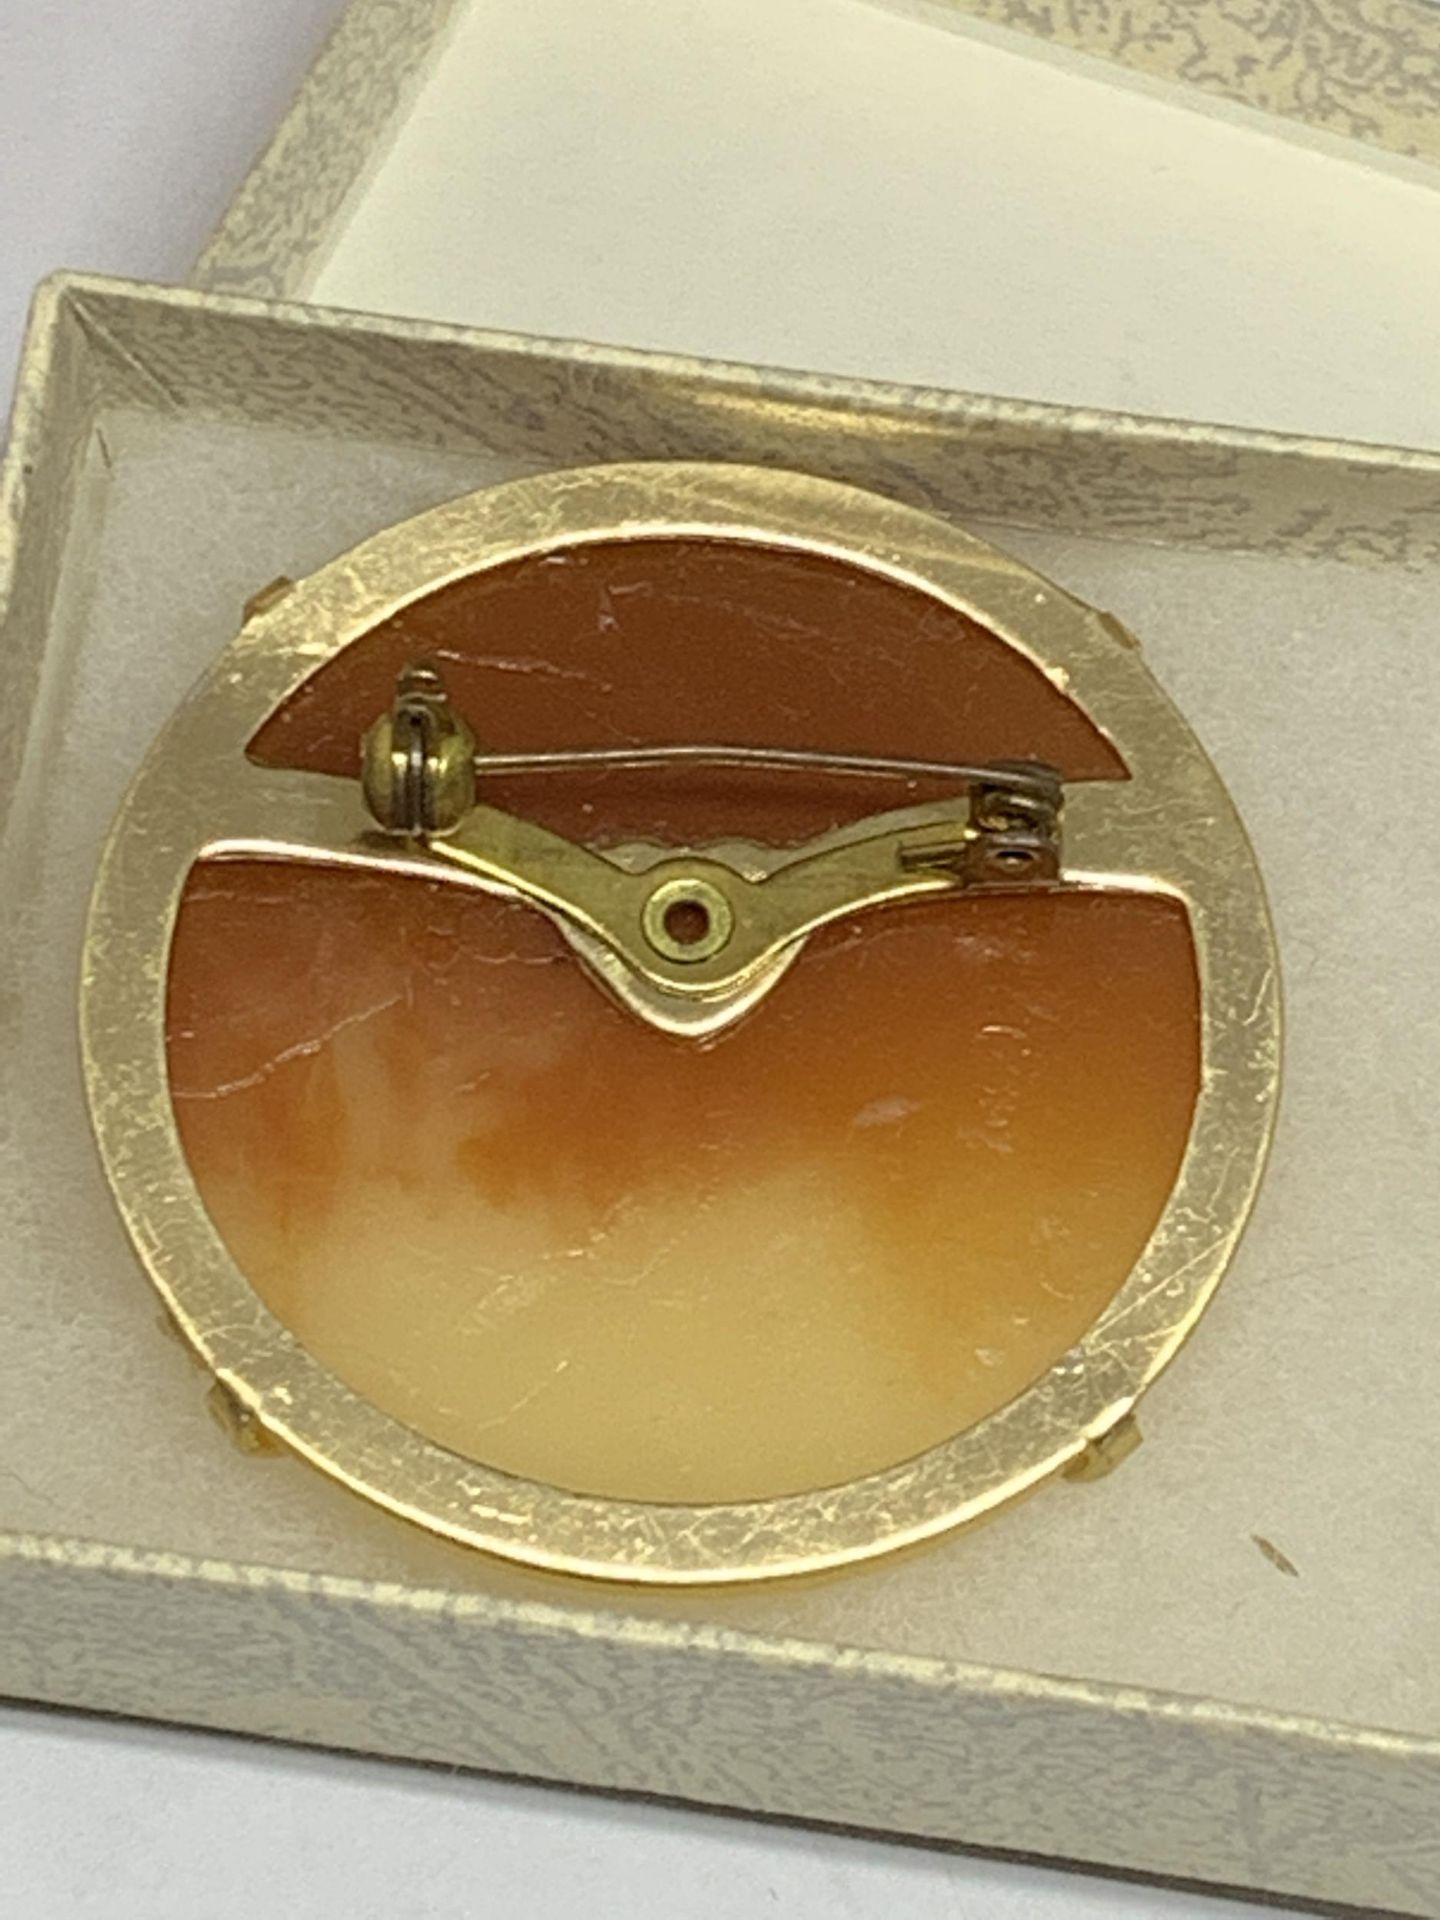 A CAMEO BROOCH IN A PRESENTATION BOX - Image 2 of 2